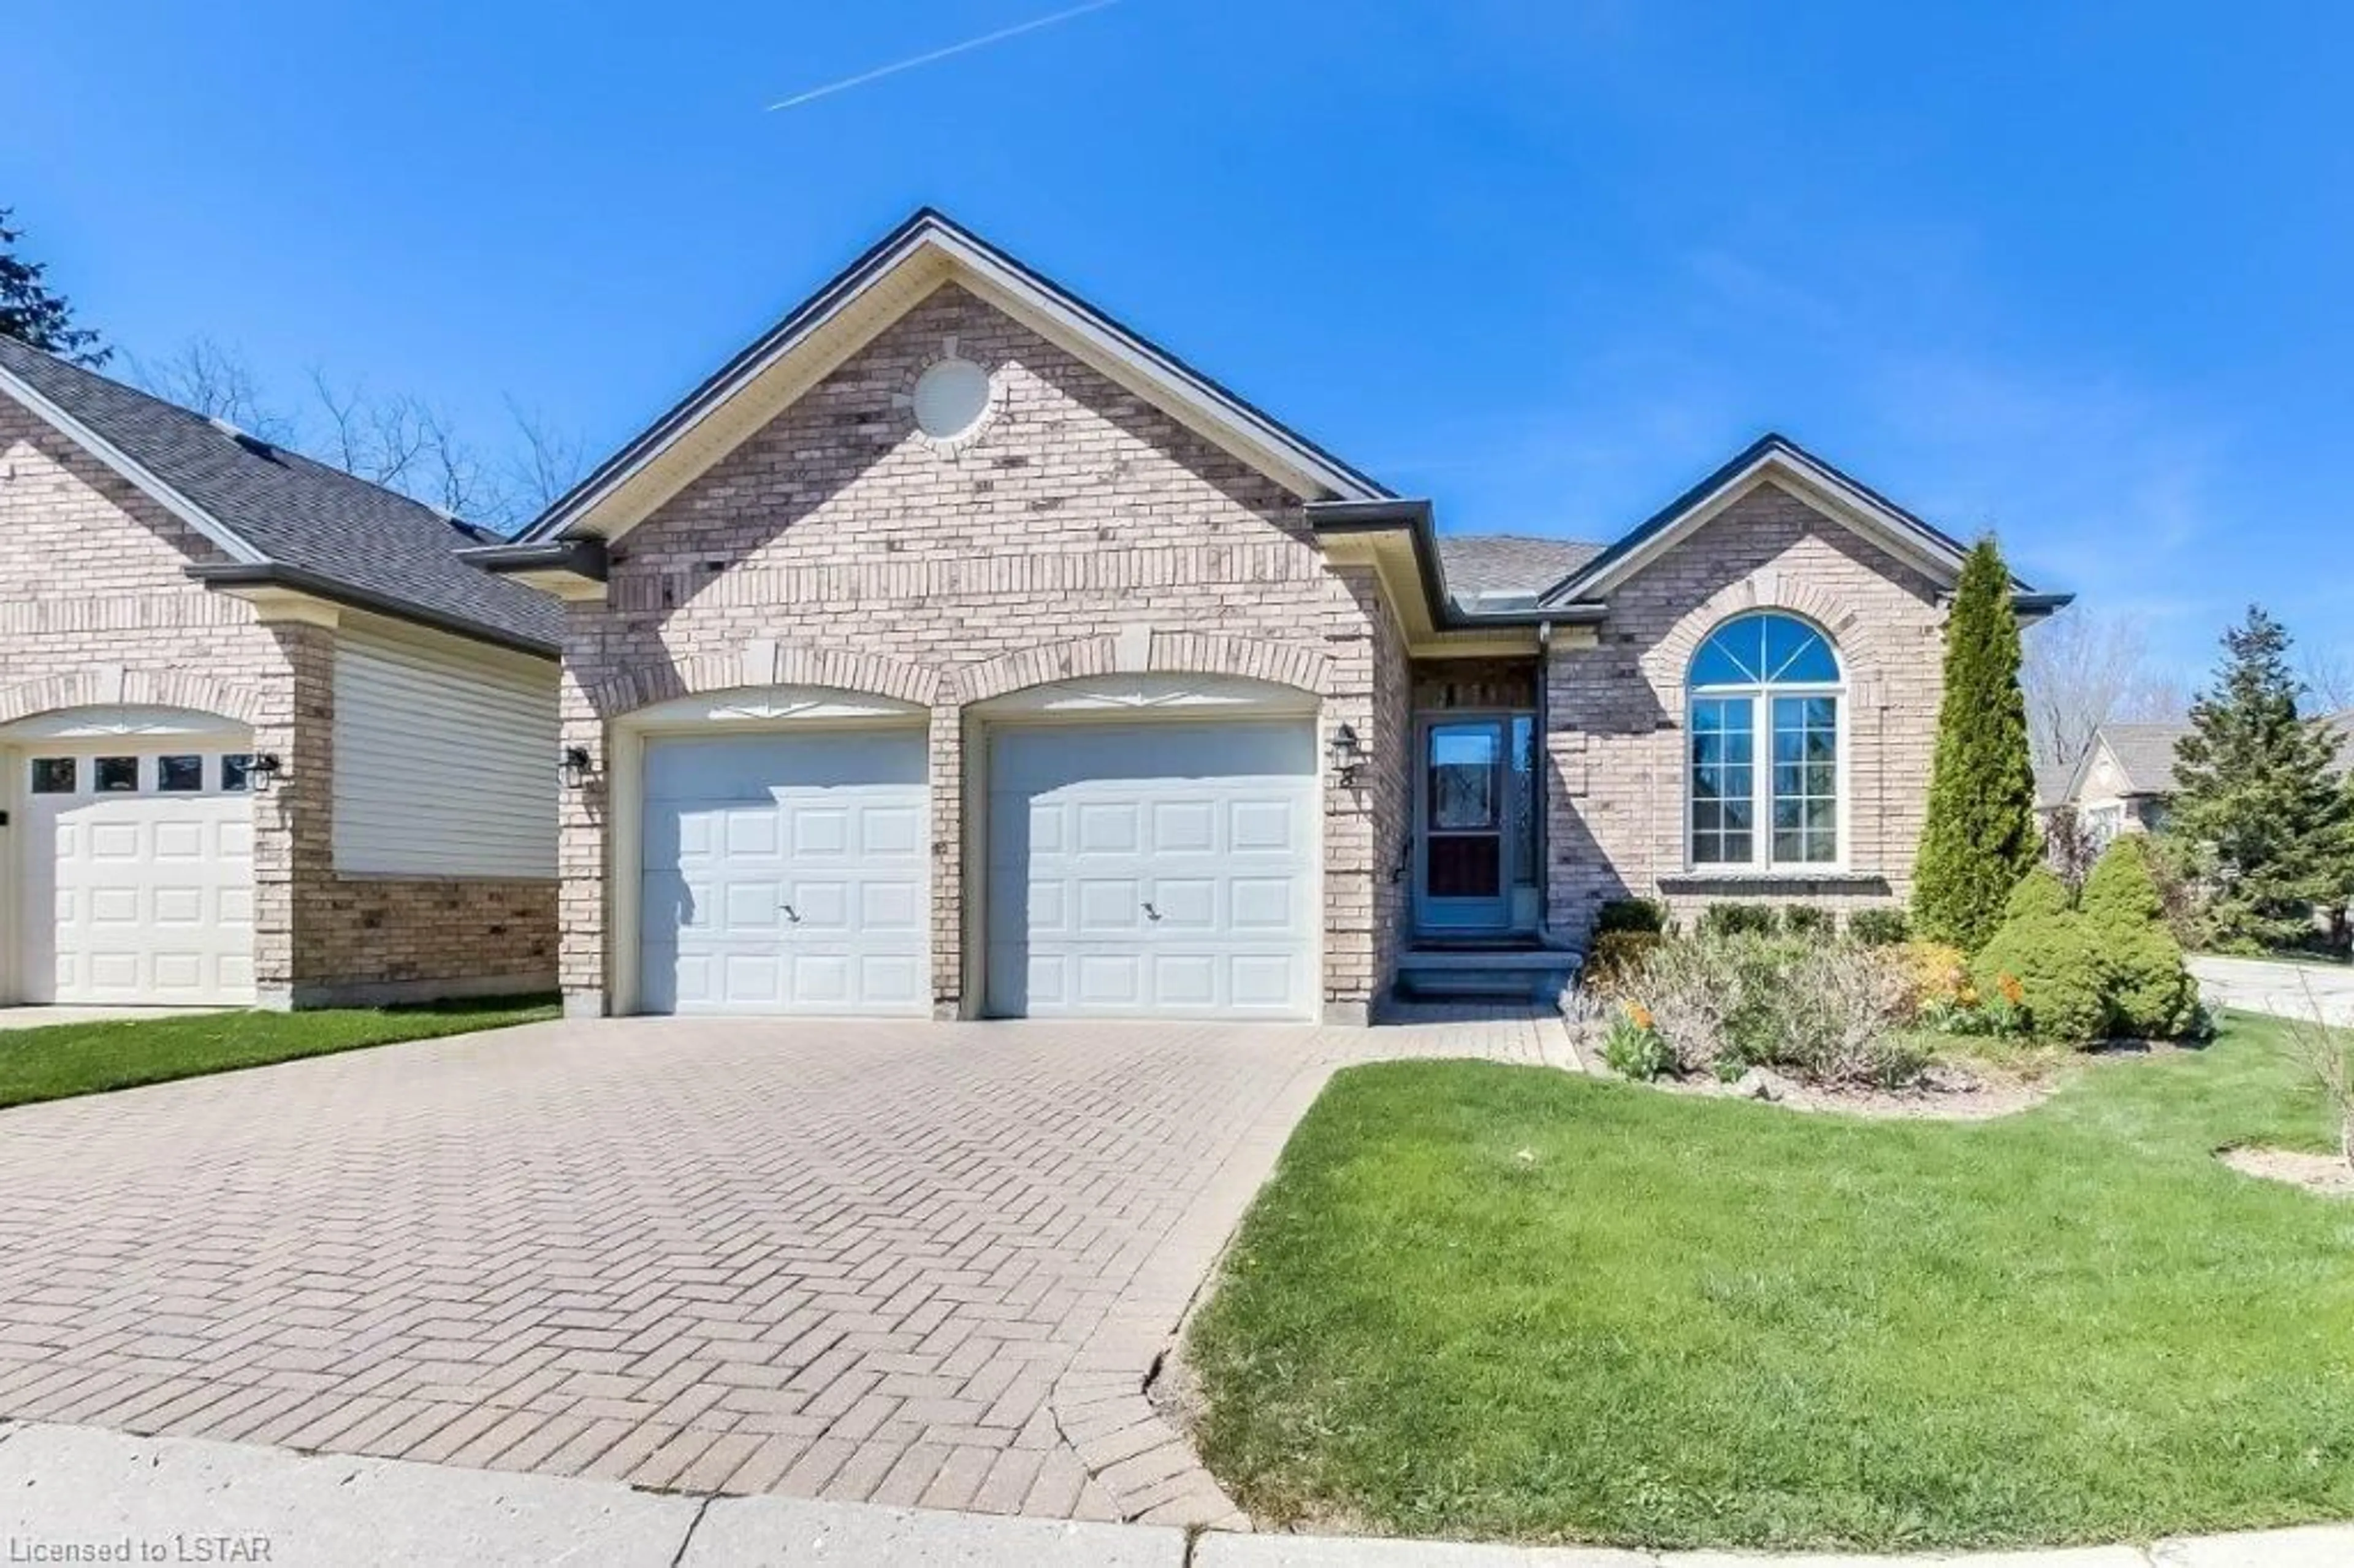 Home with brick exterior material for 681 Commissioners Rd #8, London Ontario N6K 4T9